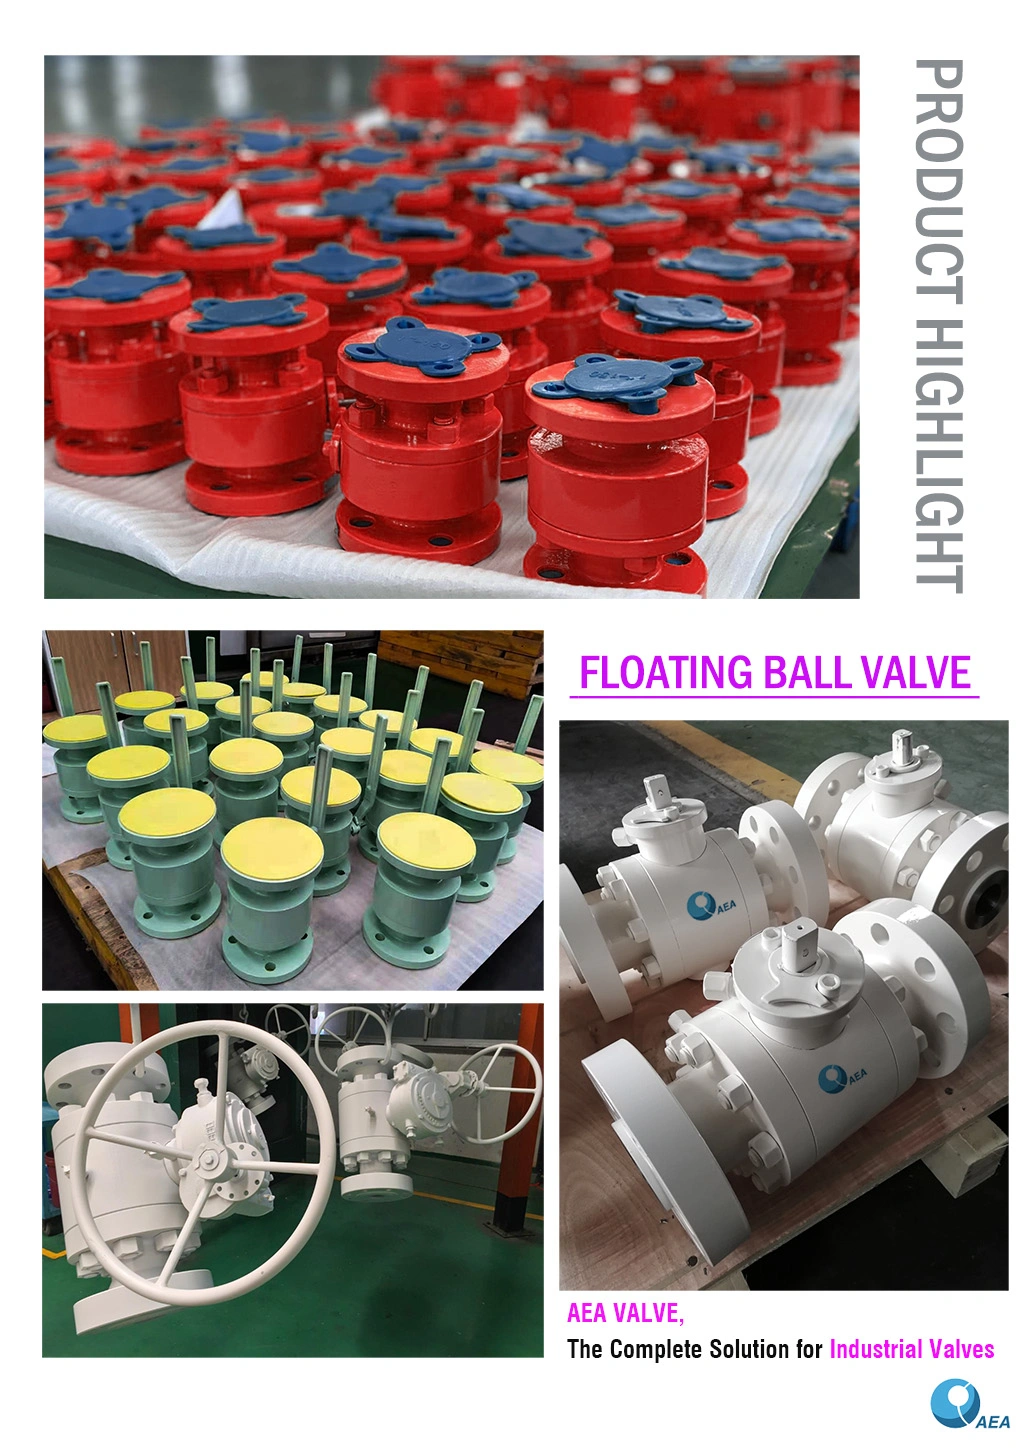 Fire Safe Design Forged Duplex Stainless Steel F51 F53 F55 Bolted Body Flange Raise Face Floating Ball Valve